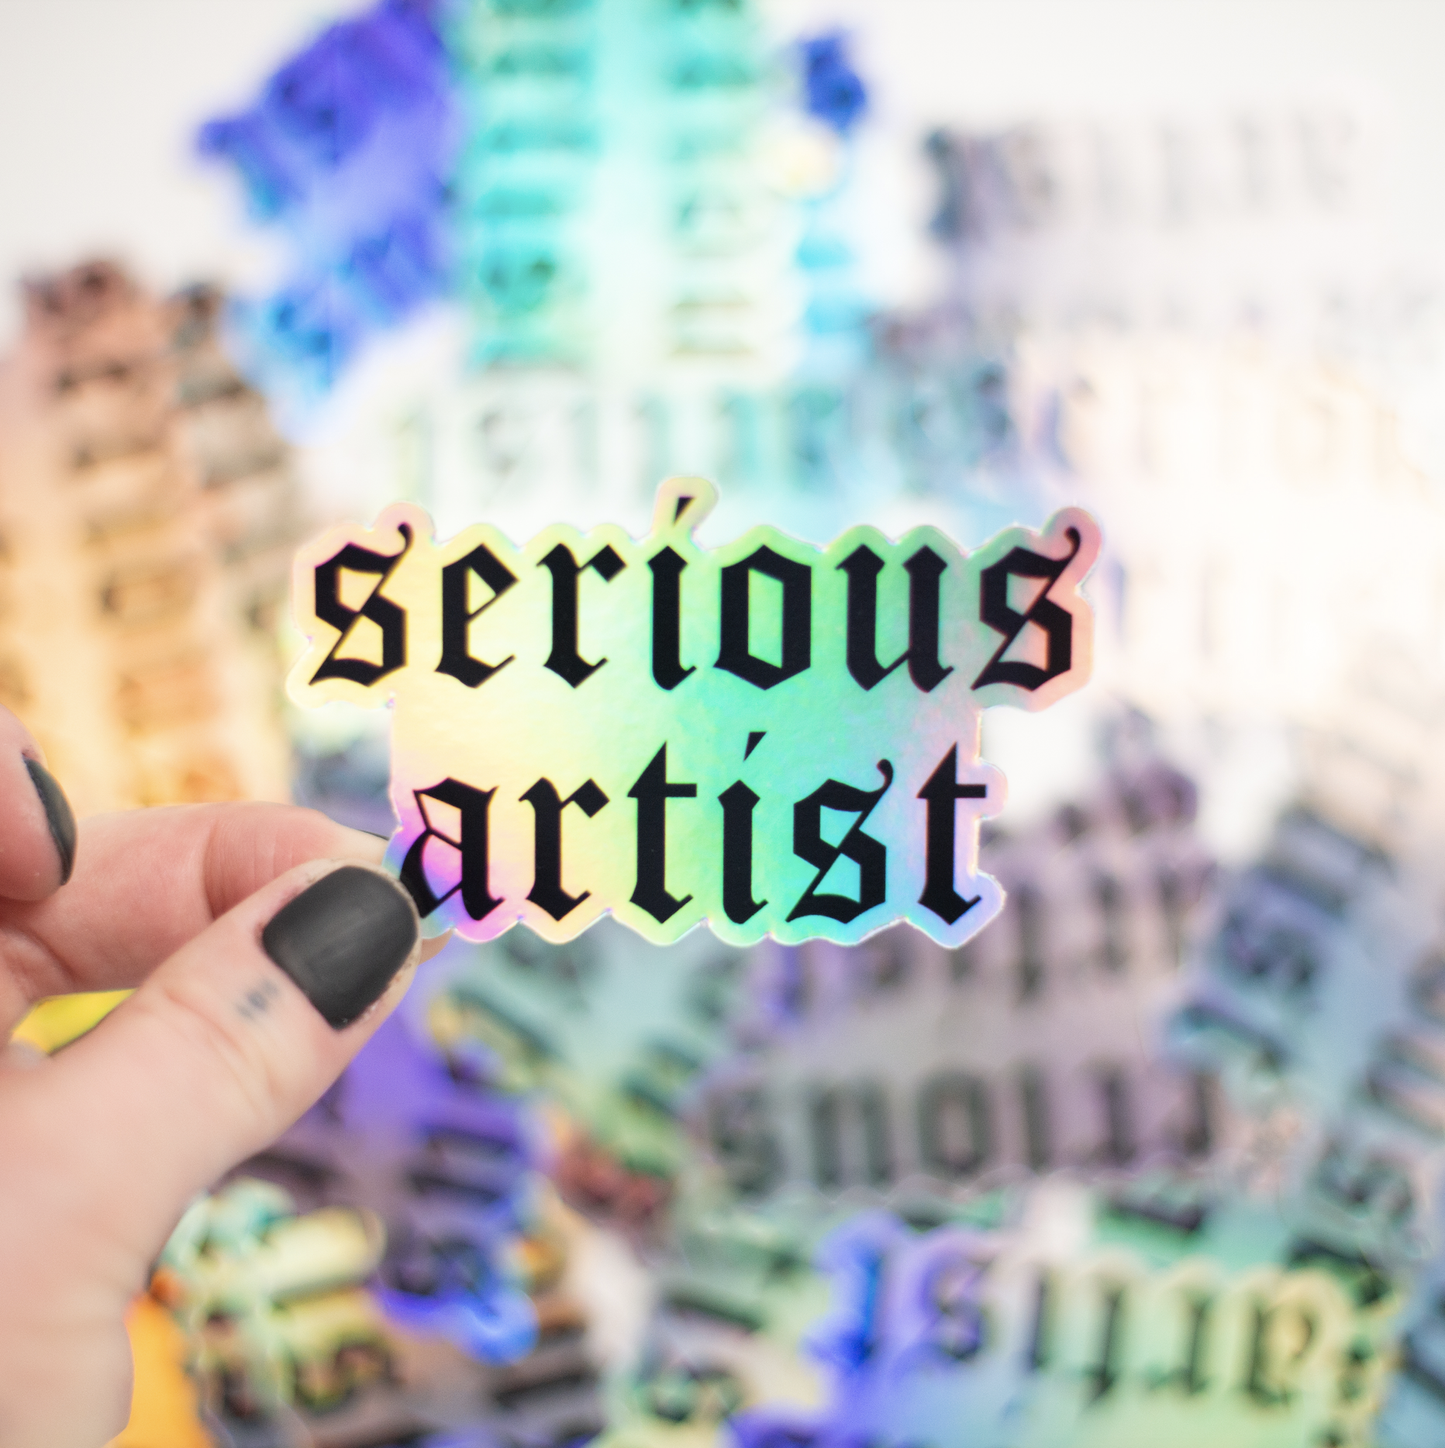 'Serious Artist" Holographic Sticker